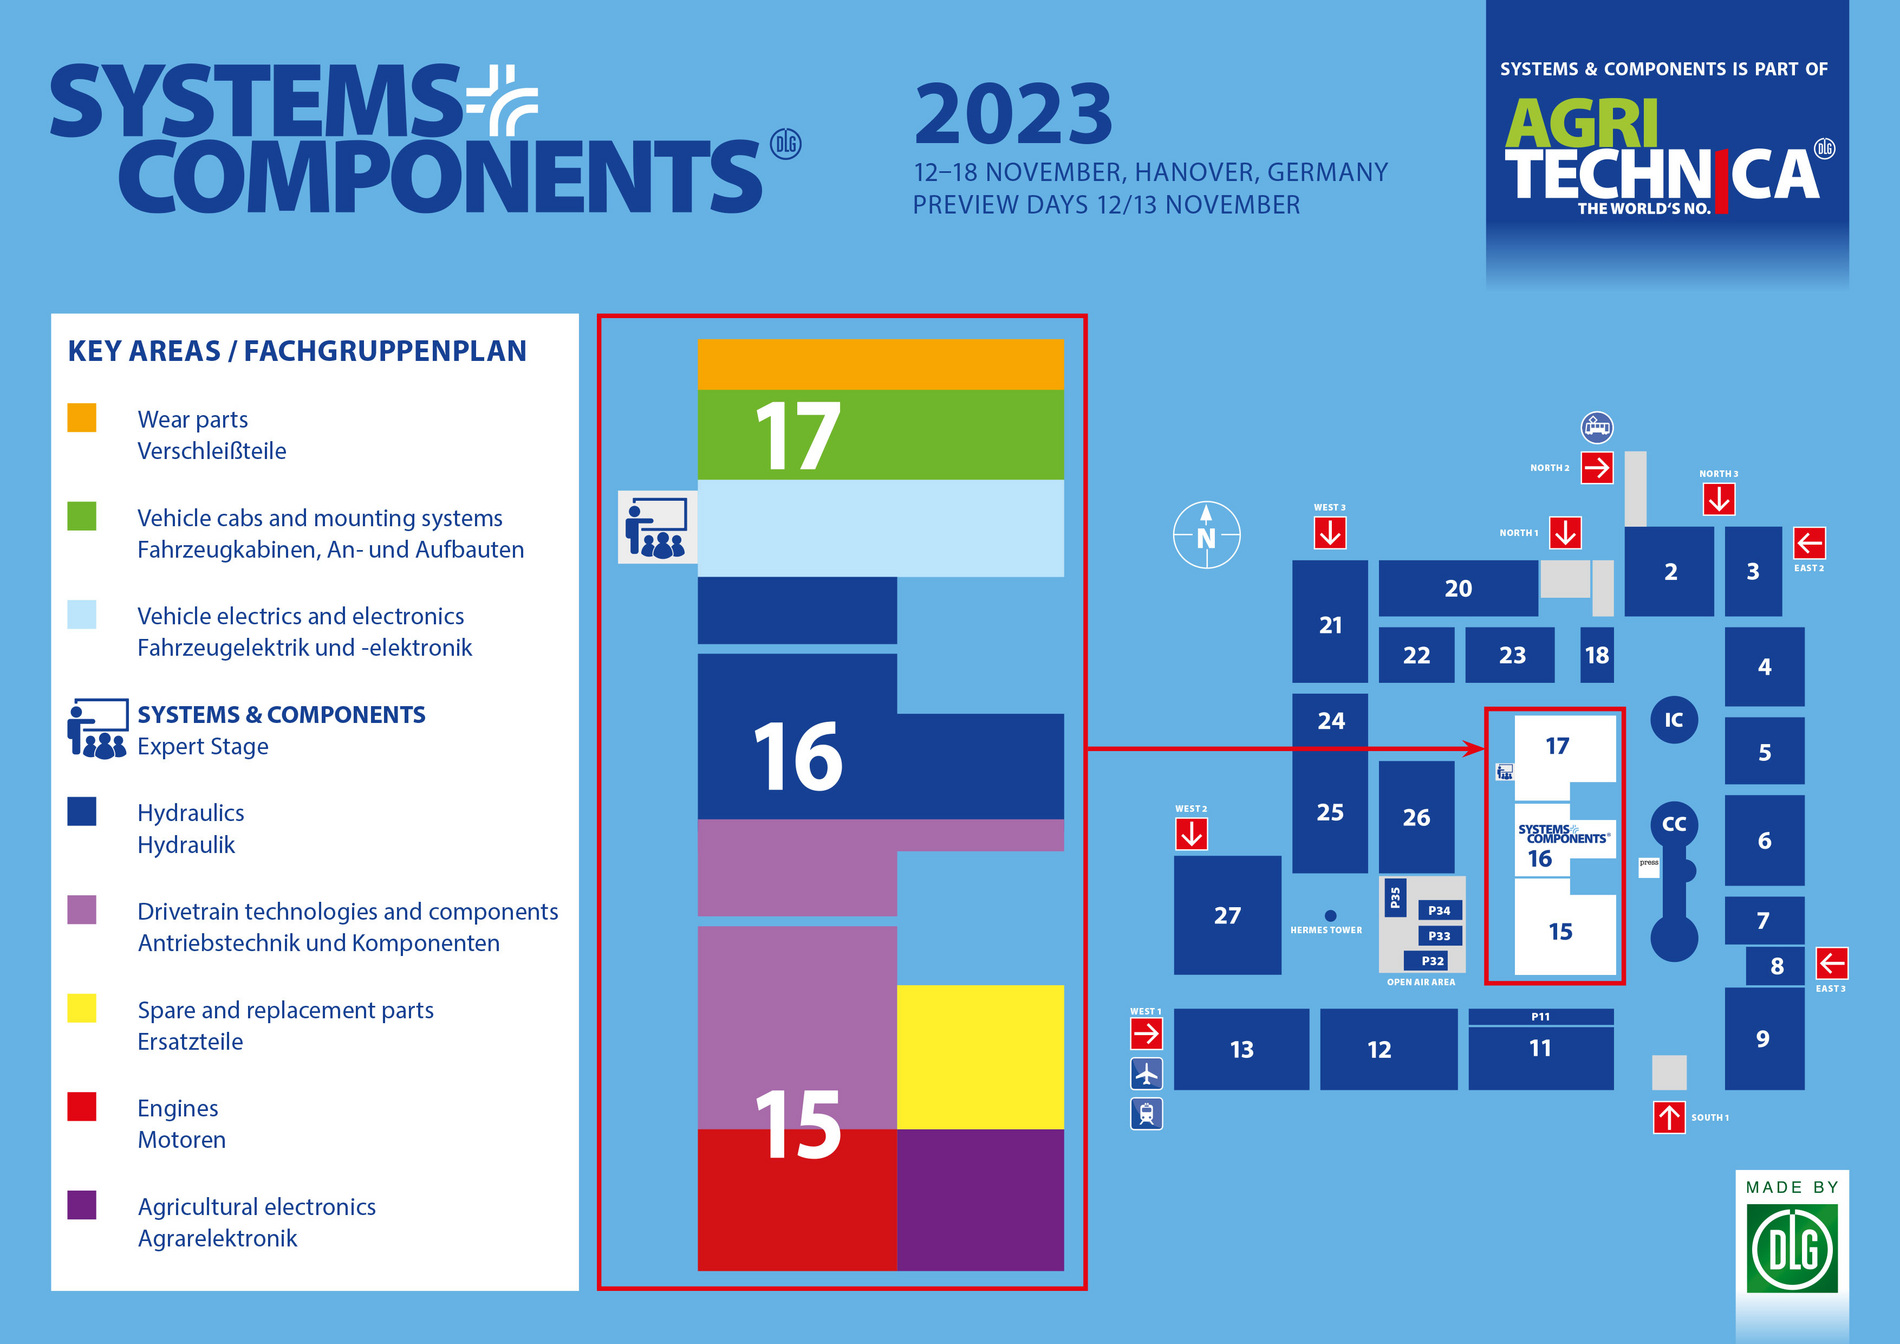 Systems & Components Key Areas 2023